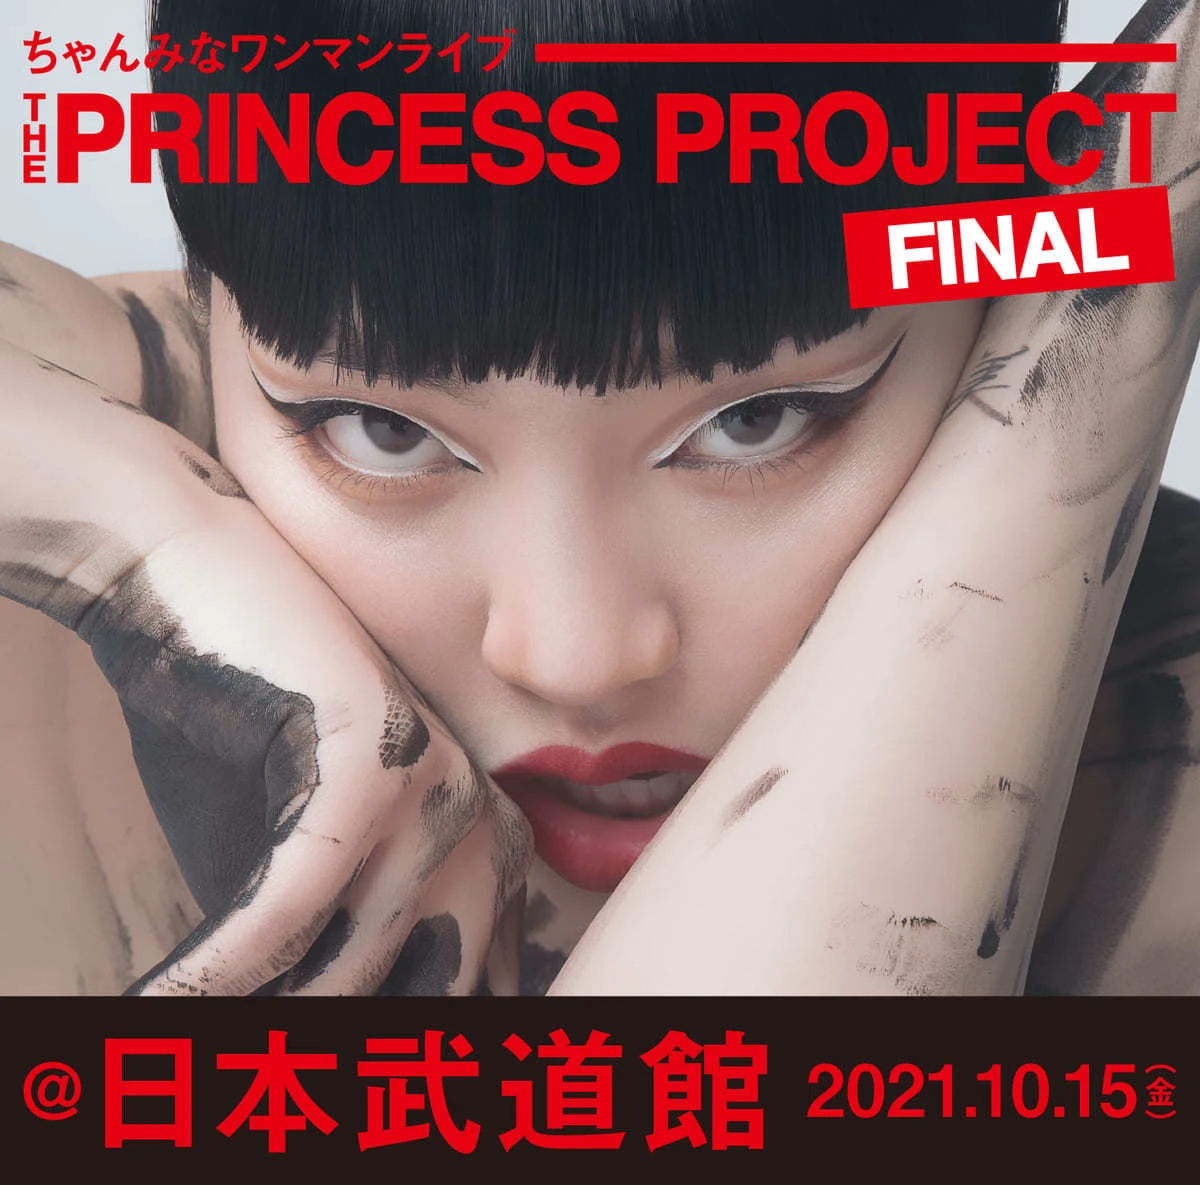 「THE PRINCESS PROJECT - FINAL -」